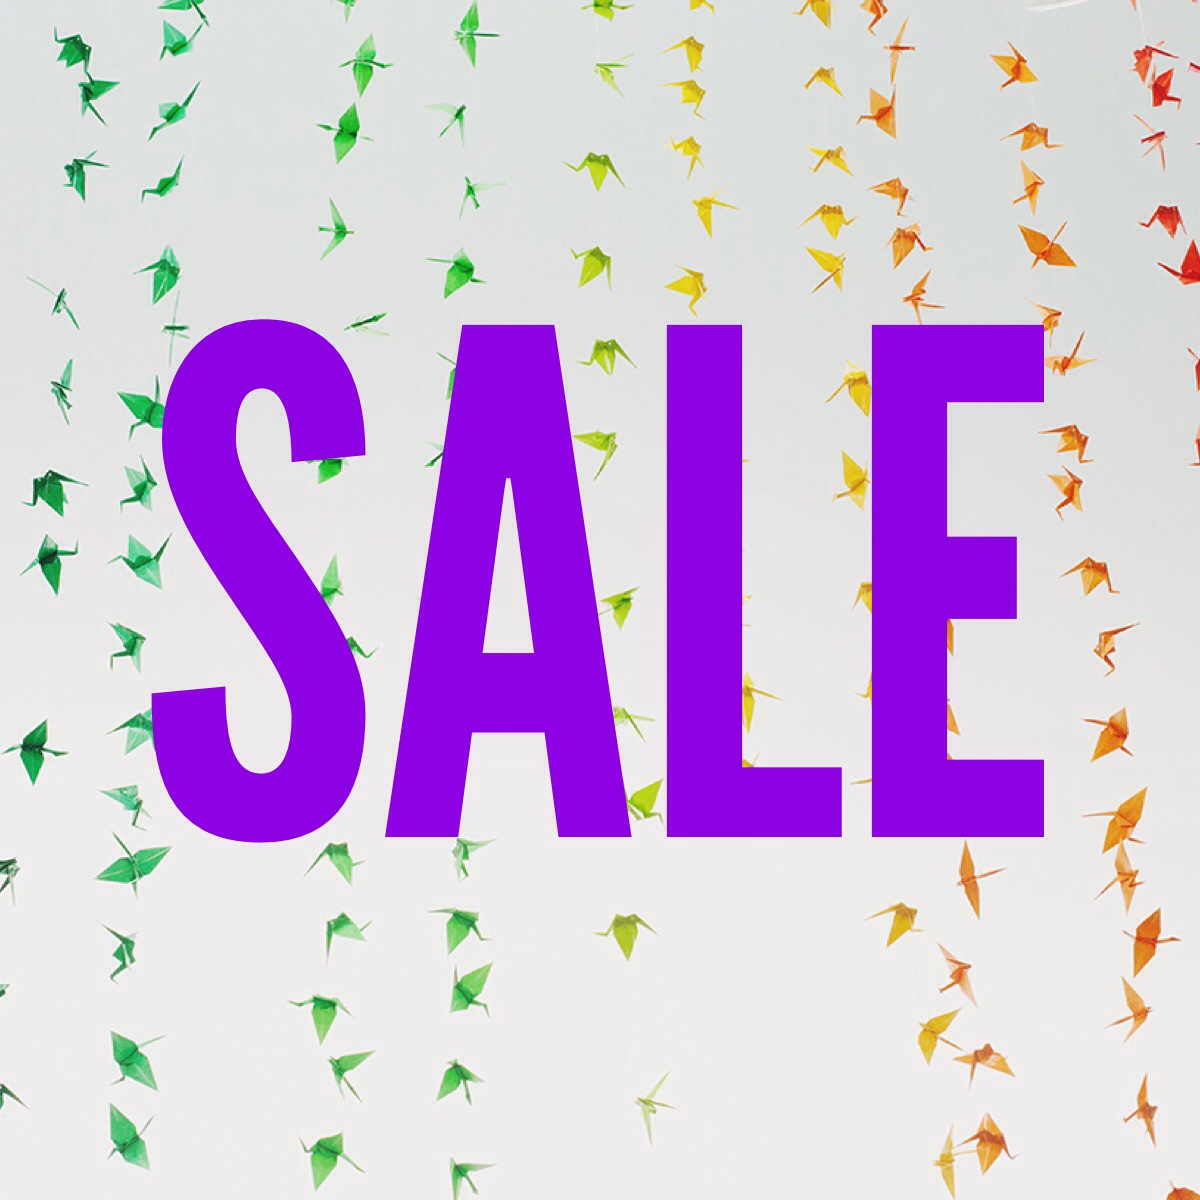 sale | Sale on Handmade Goods at Pop Shop America Online Boutique | Vintage Inspired Fashion, Handmade Jewelry, Quirky Cards, DIY Art and Science Kits, Clothing, T Shirts and More